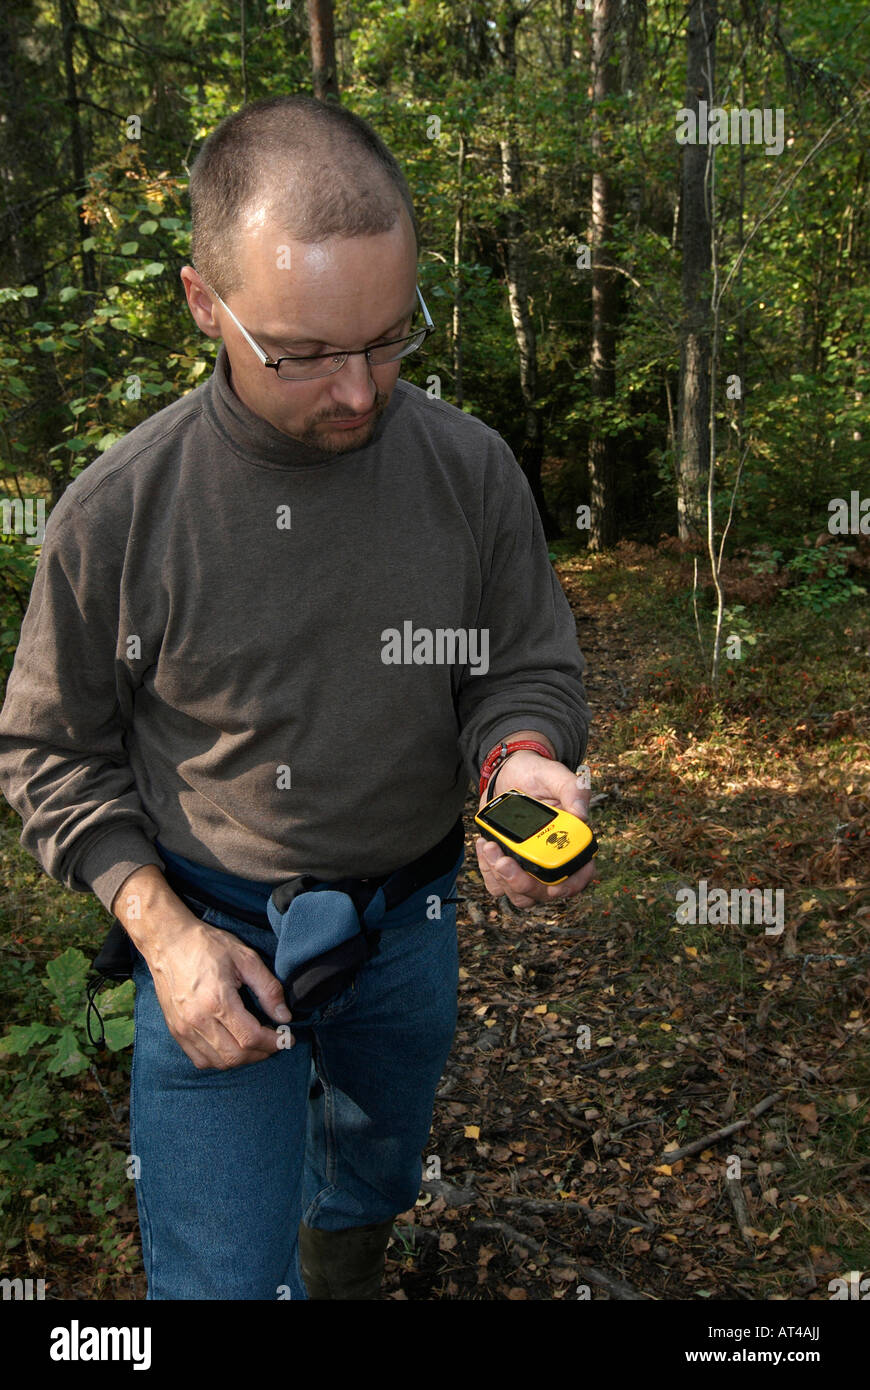 Male hiker verifying the course with a GPS receiver in the forest of Hagelstena Uppsala Lan Sweden September 2007 Stock Photo